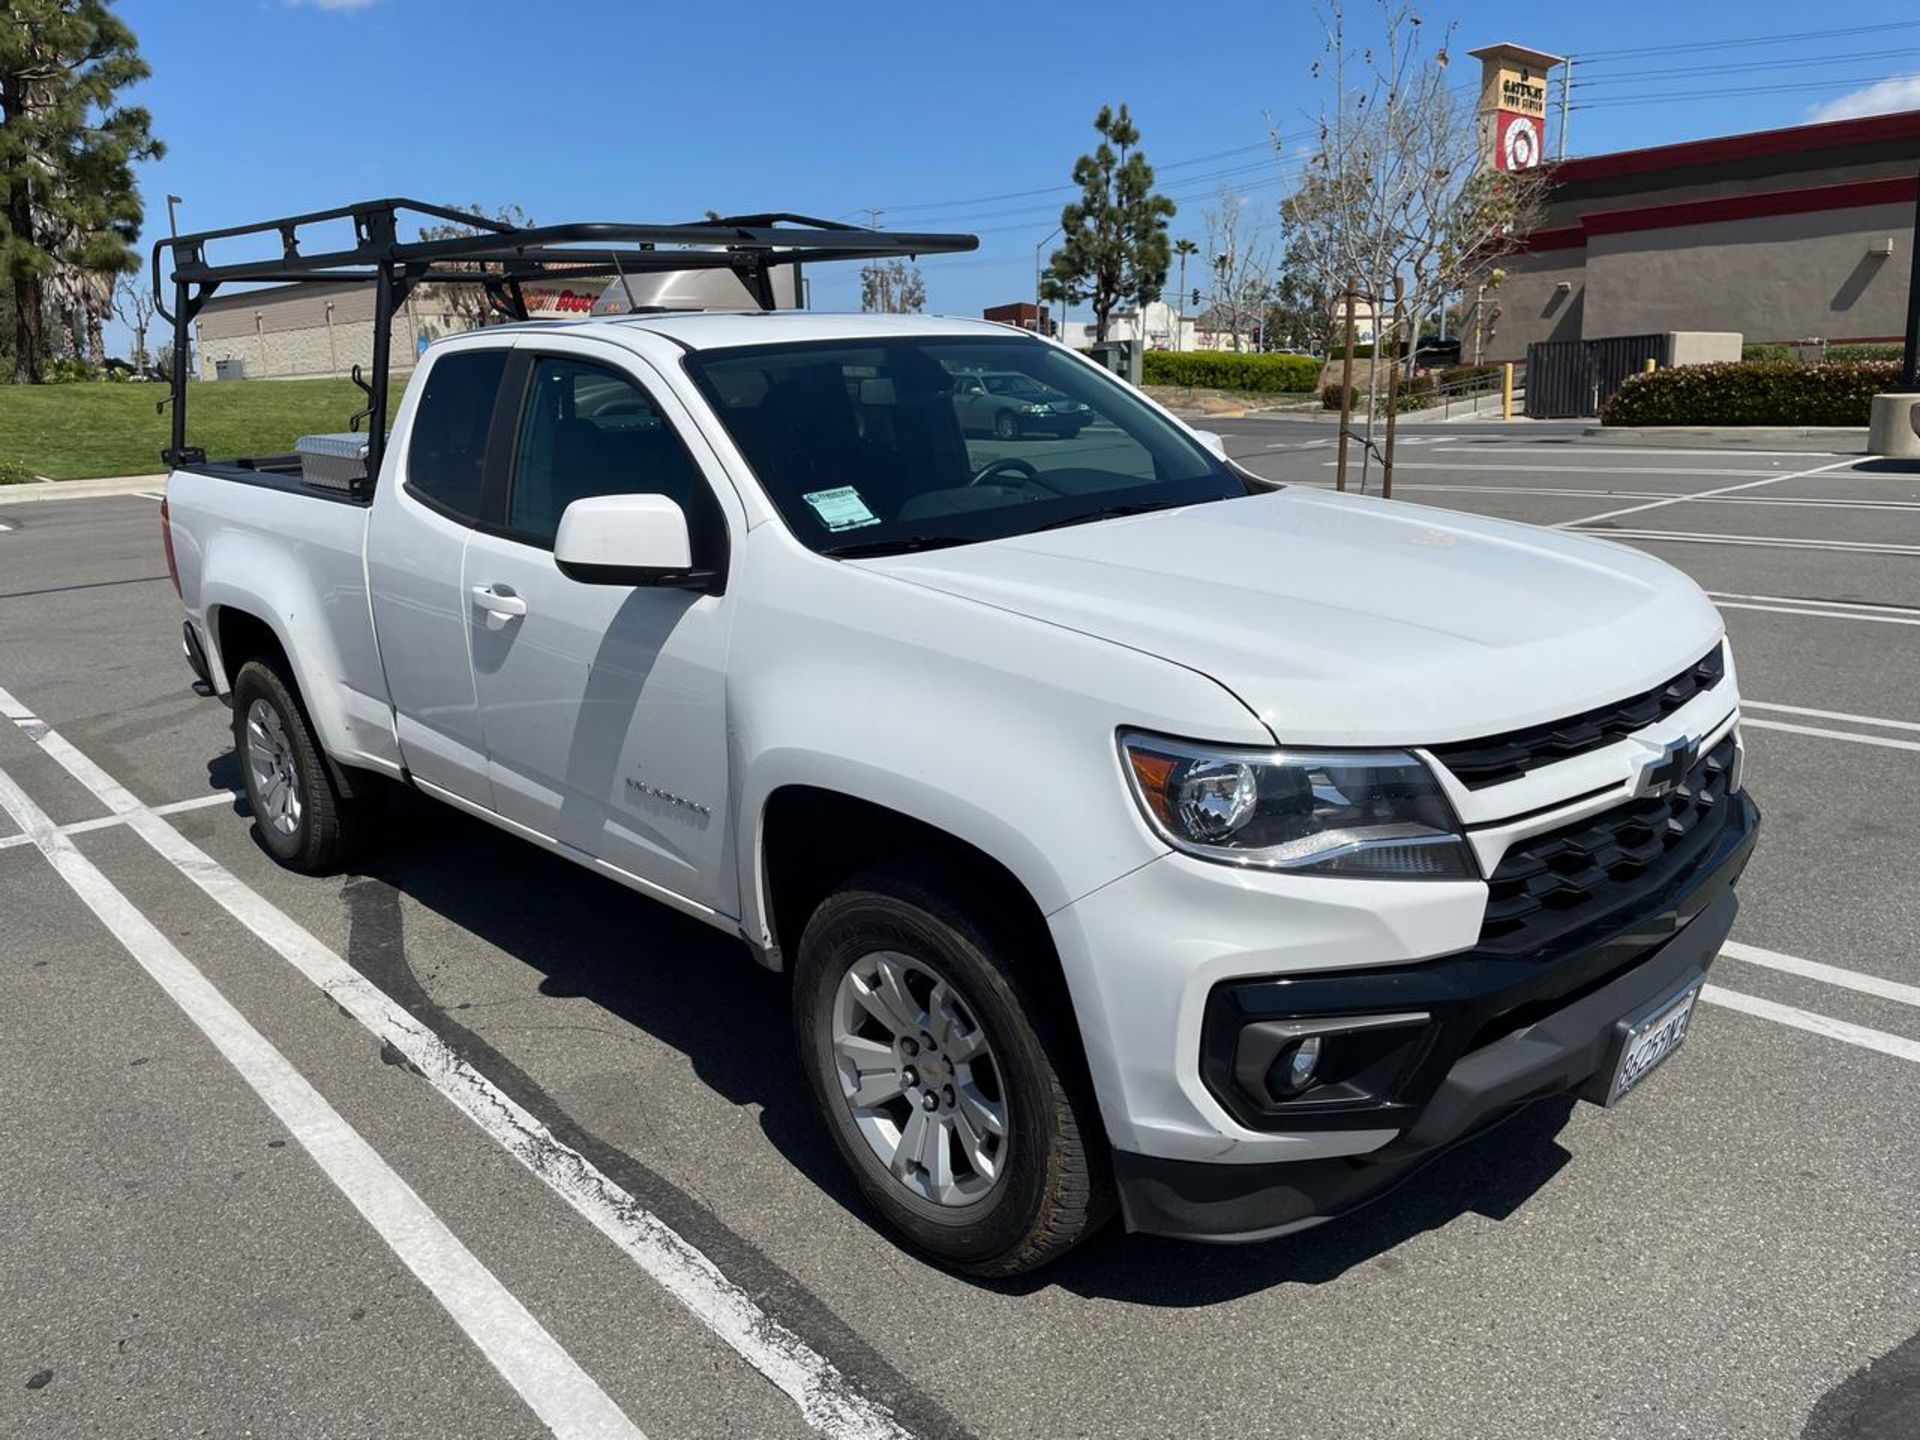 2022 Chevrolet Colorado LT Extended Cab 4x2 Pickup Truck - Image 8 of 23